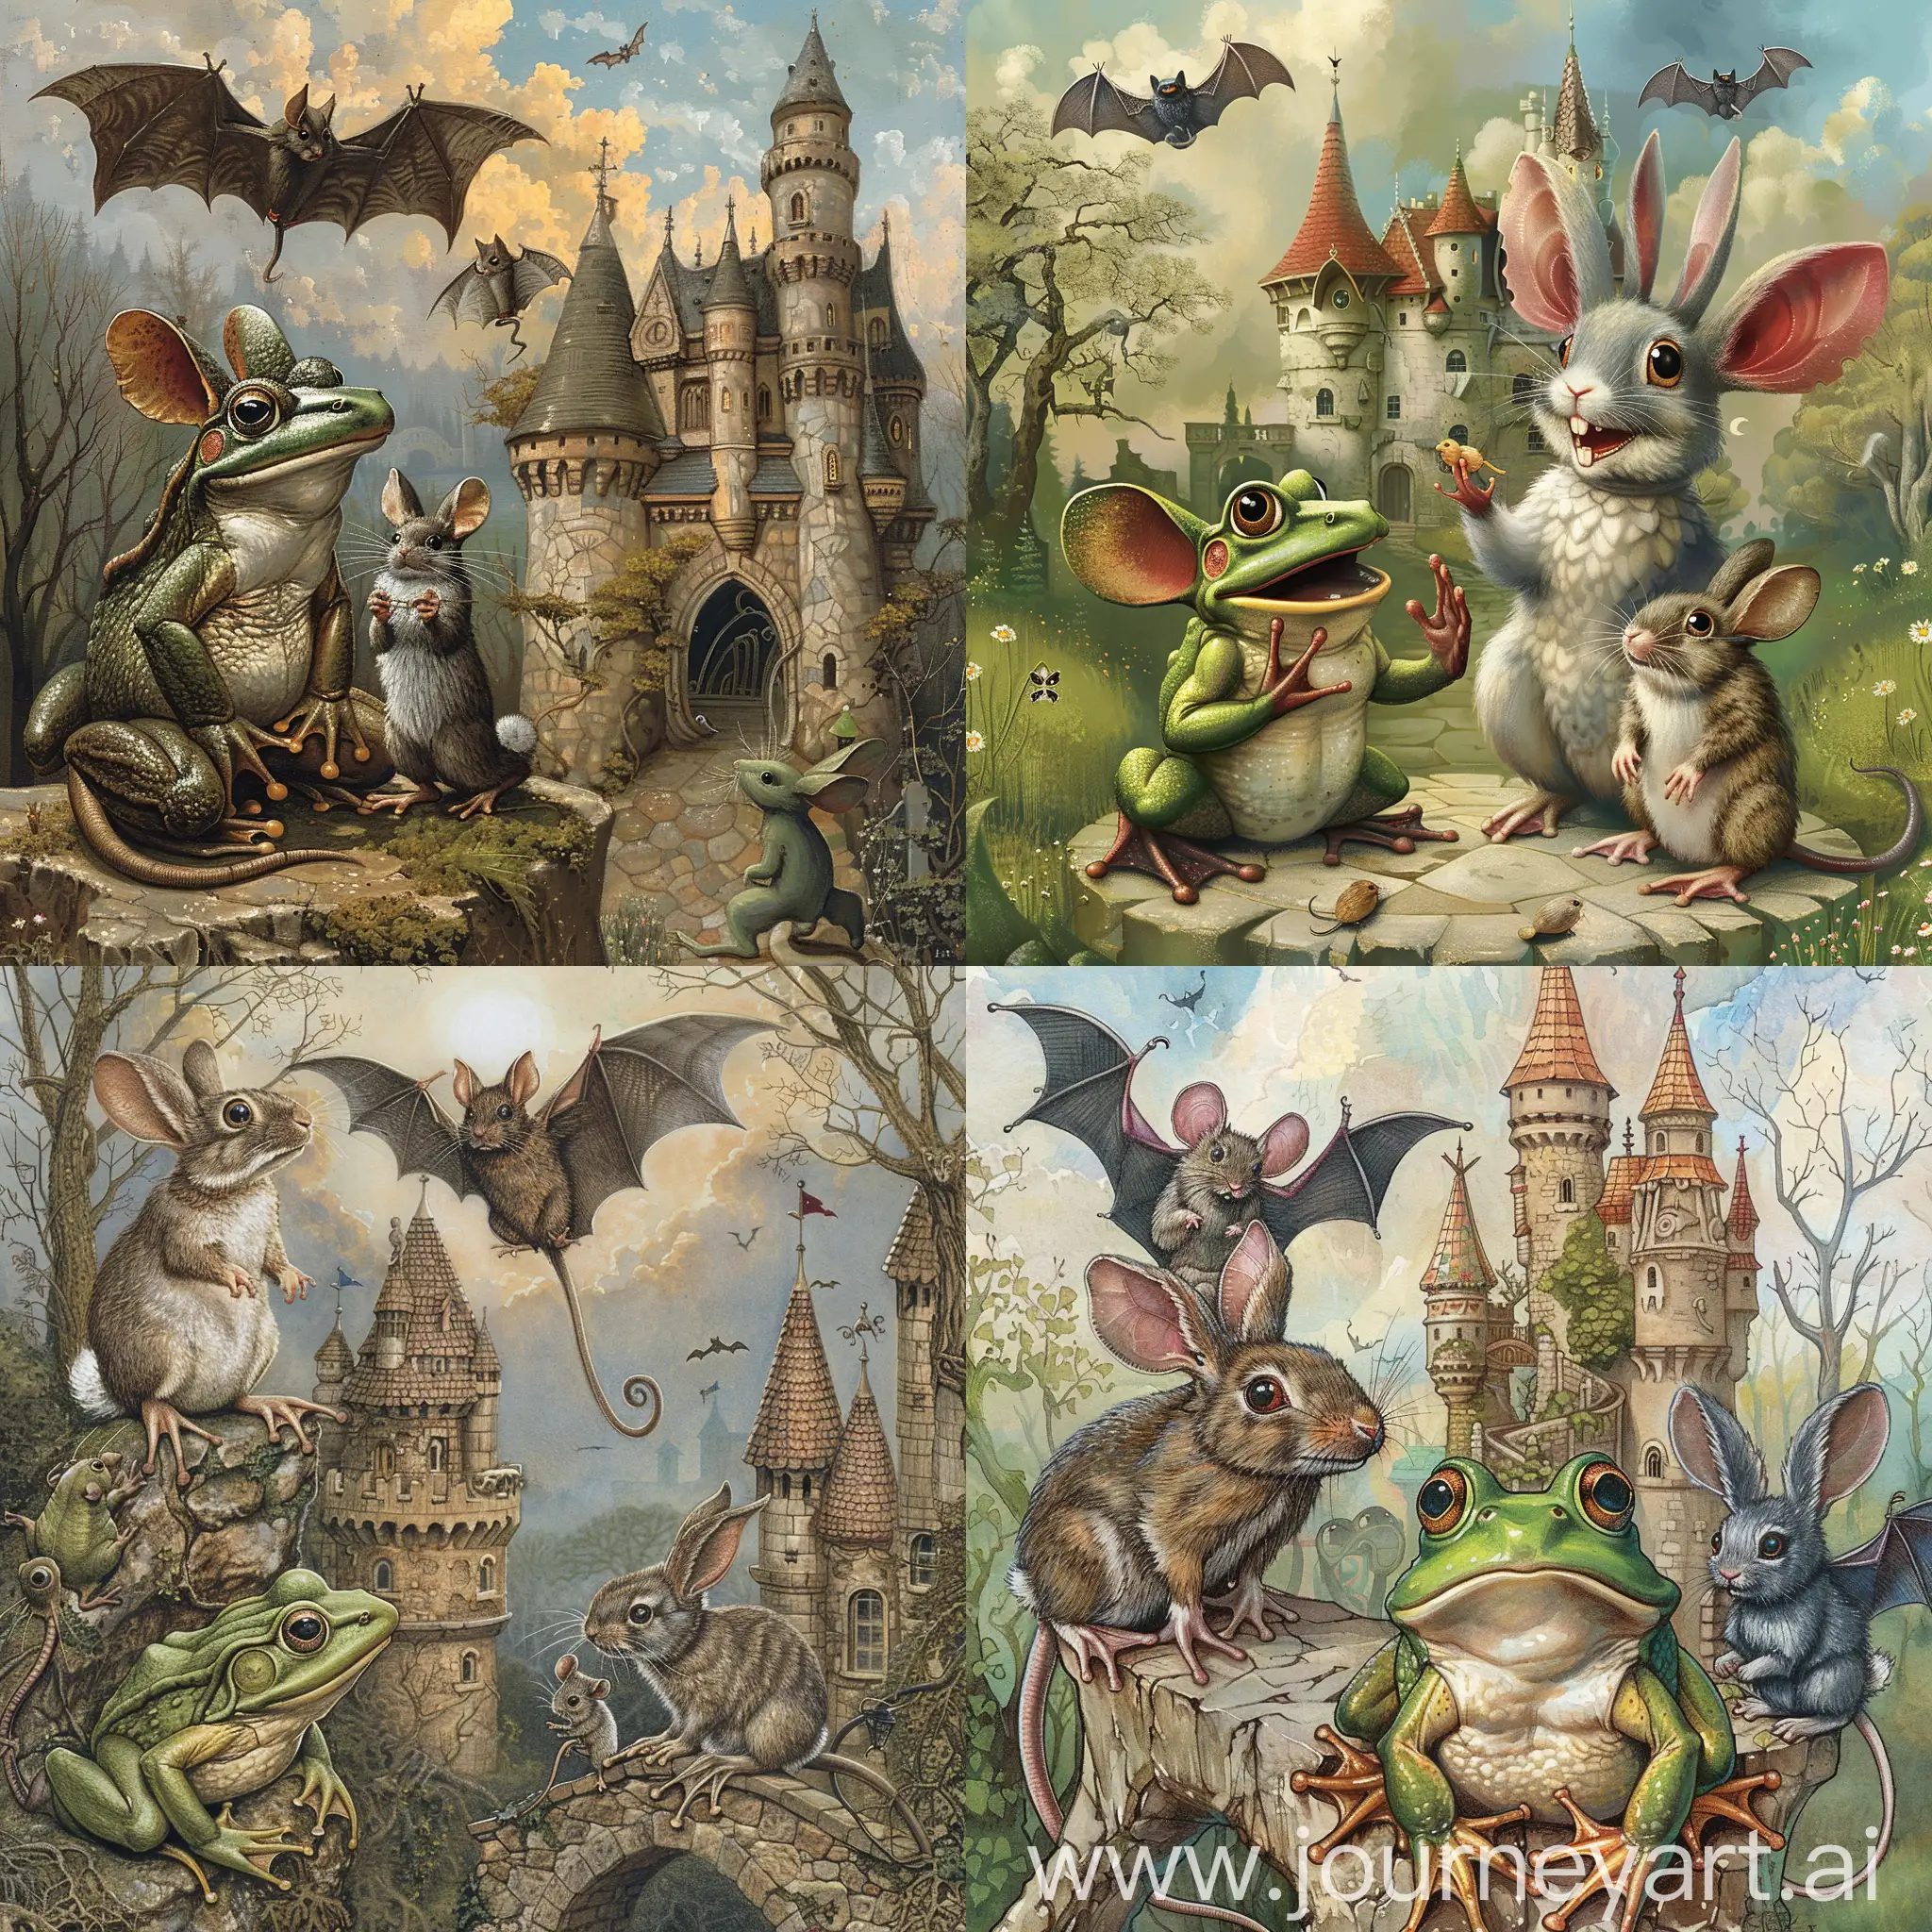 Fairy-Tale-Kingdom-Friends-Frog-Mouse-Rabbit-and-Bat